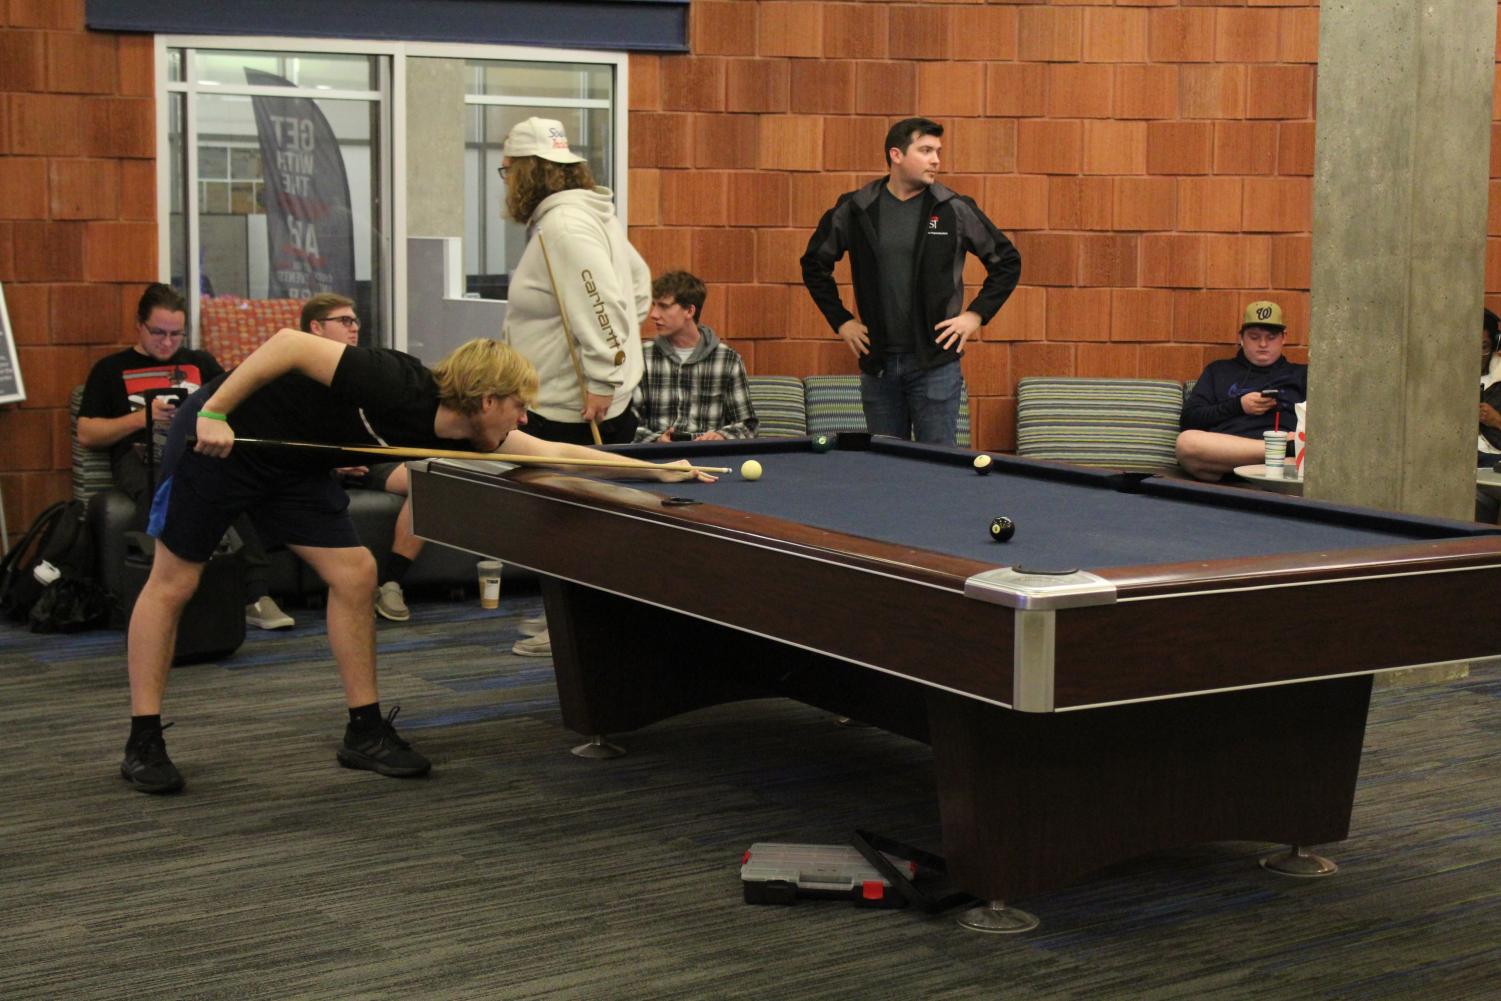 Students continue to play pool after other students and faculty were evacuated around 12:15 p.m. to the University Center East basement Friday. (Photo by Emalee Jones)